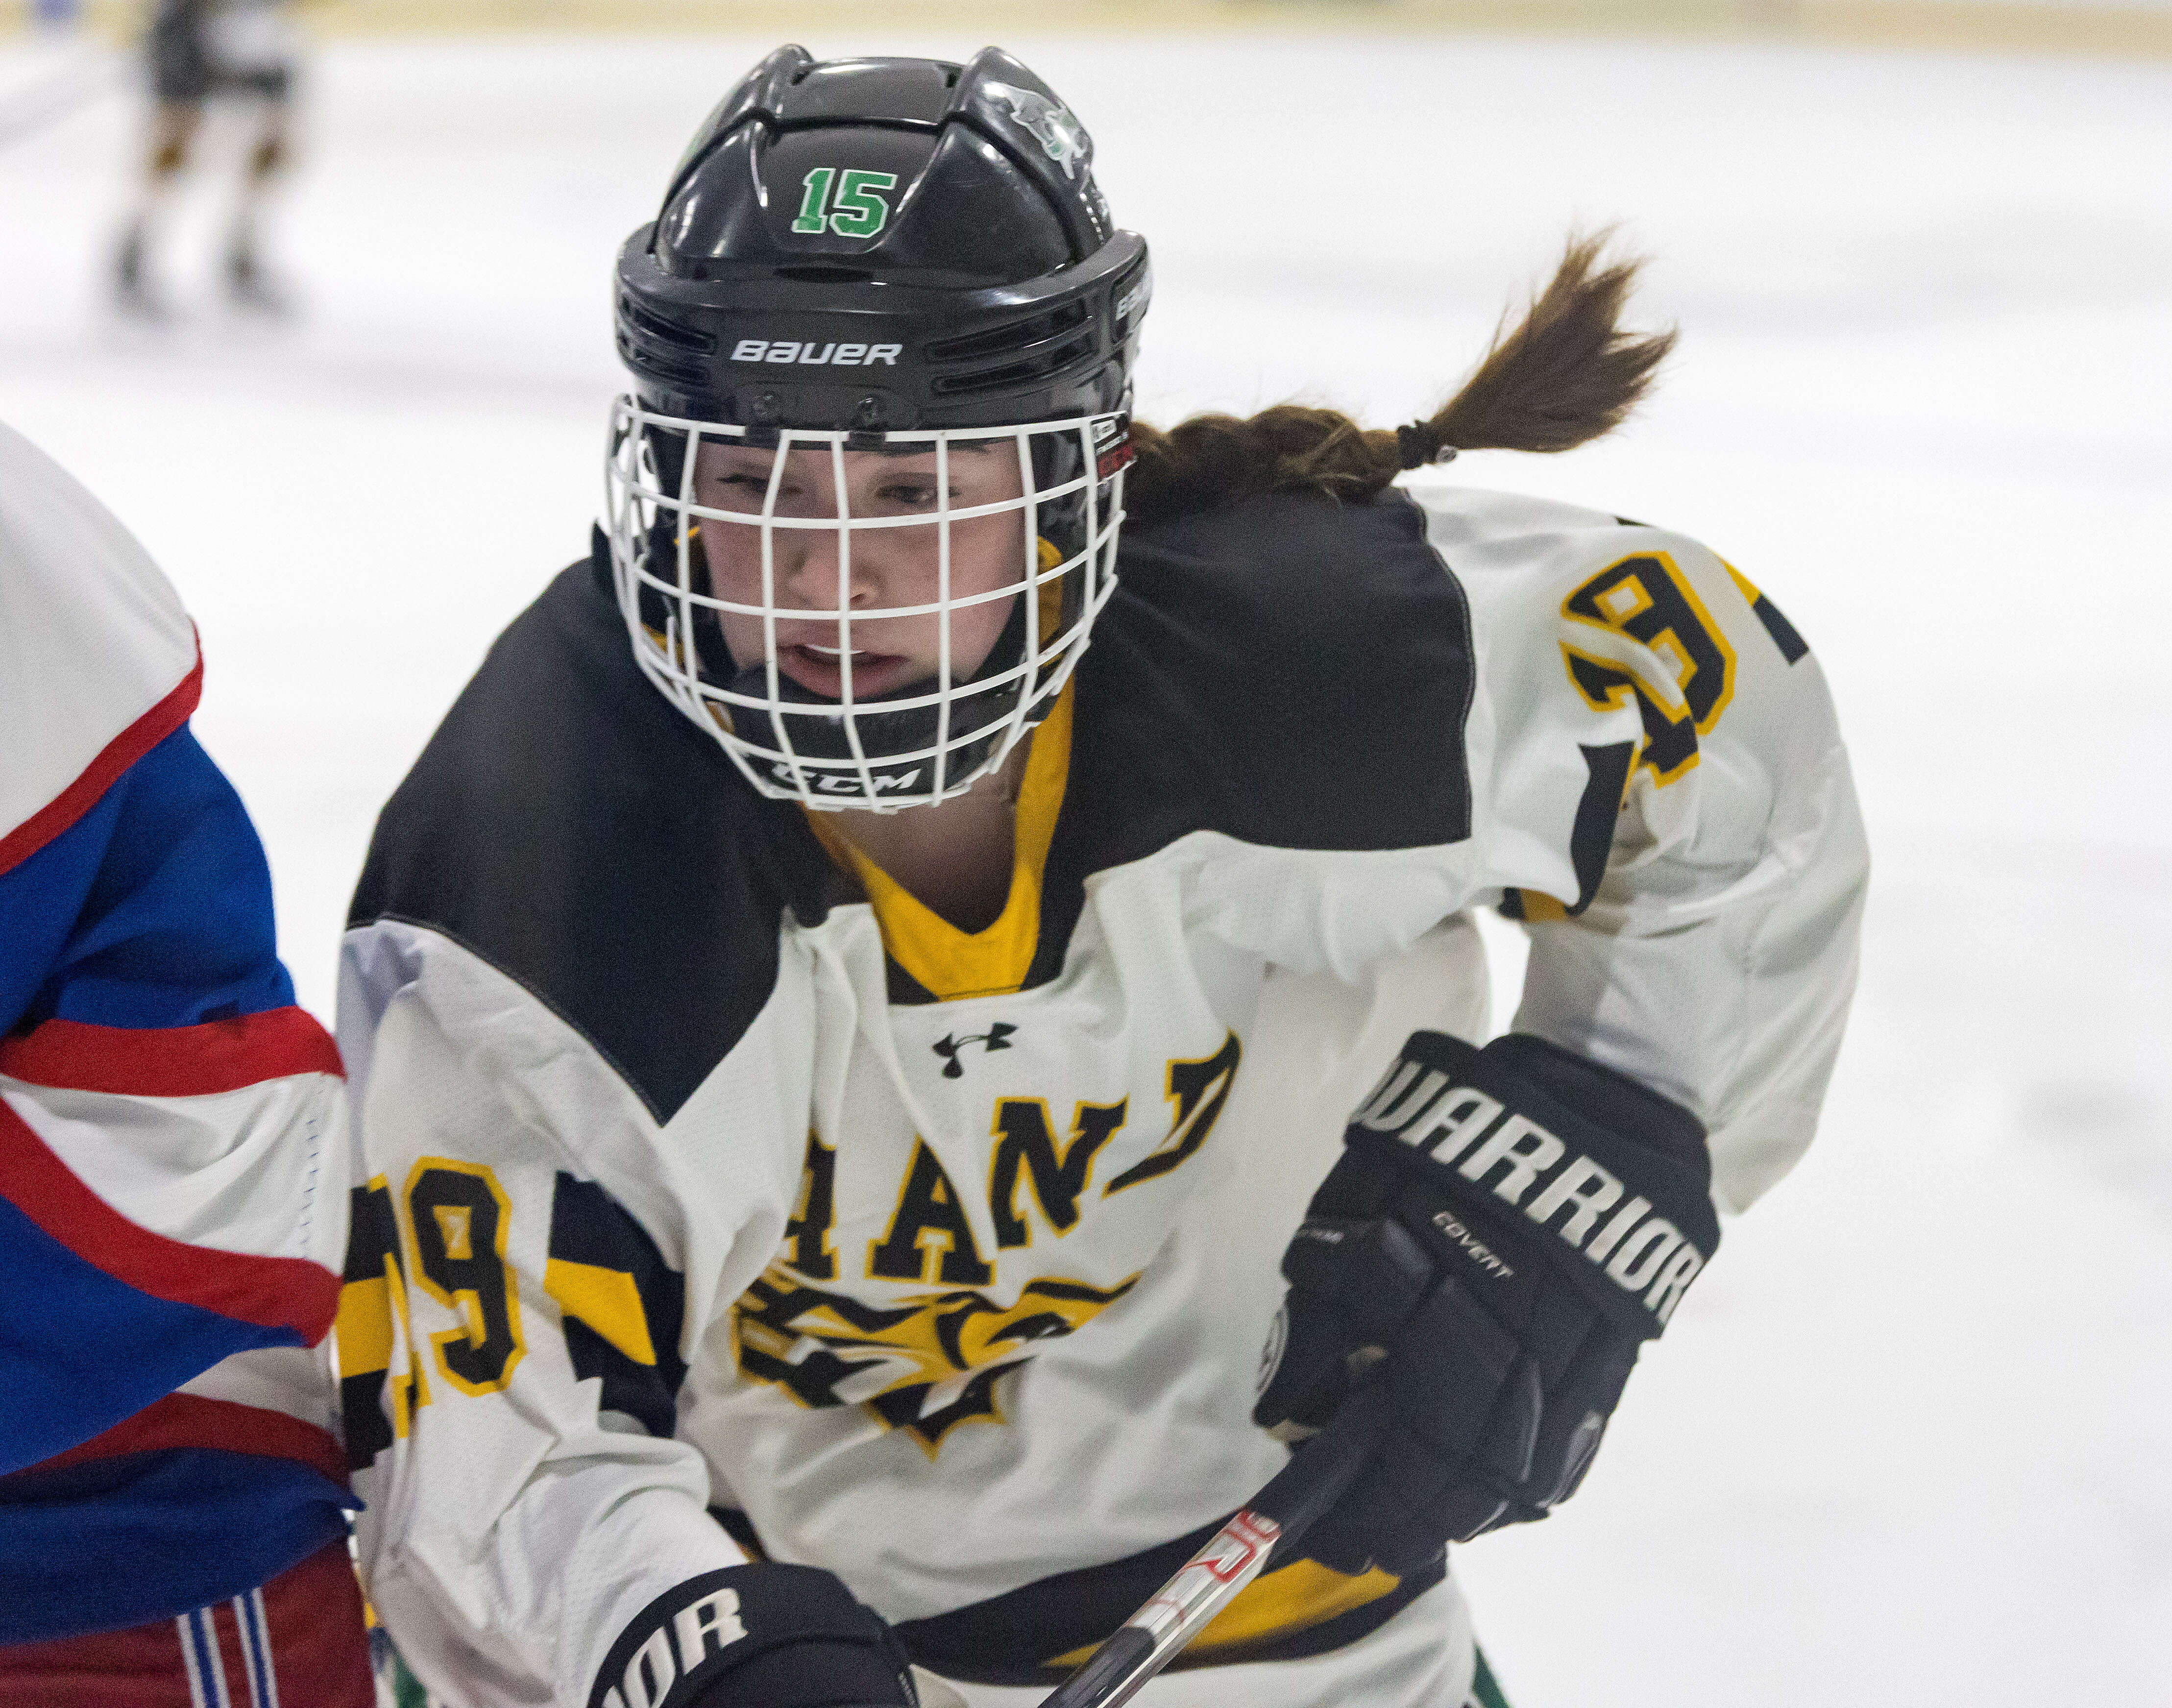 Tigers' Co-op Girls' Hockey Team Takes Defeat to WH-SHA